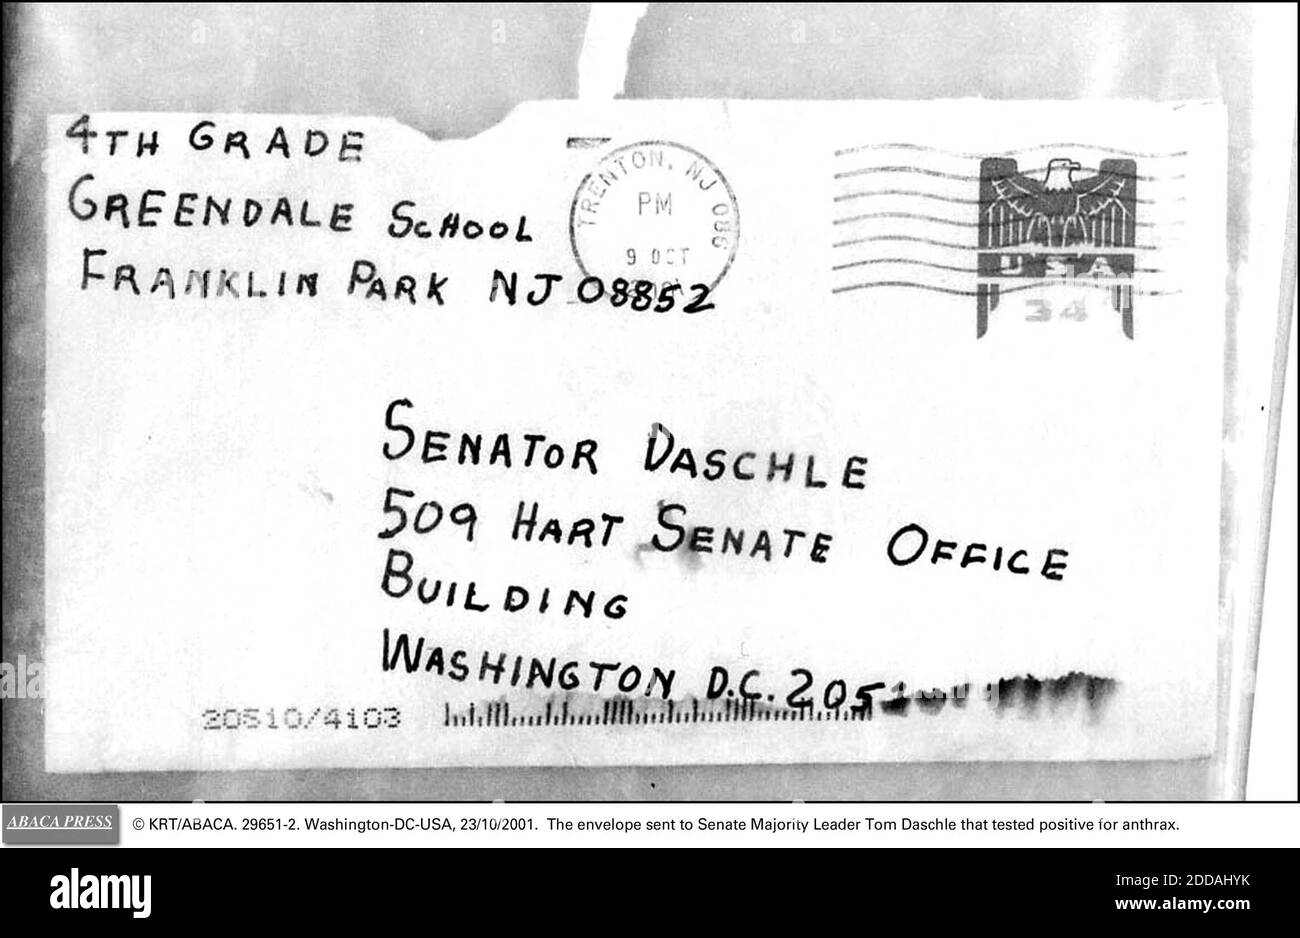 NO FILM, NO VIDEO, NO TV, NO DOCUMENTARY - © KRT/ABACA. 29651-2. Washington-DC-USA, 23/10/2001. The envelope sent to Senate Majority Leader Tom Daschle that tested positive for anthrax. Stock Photo